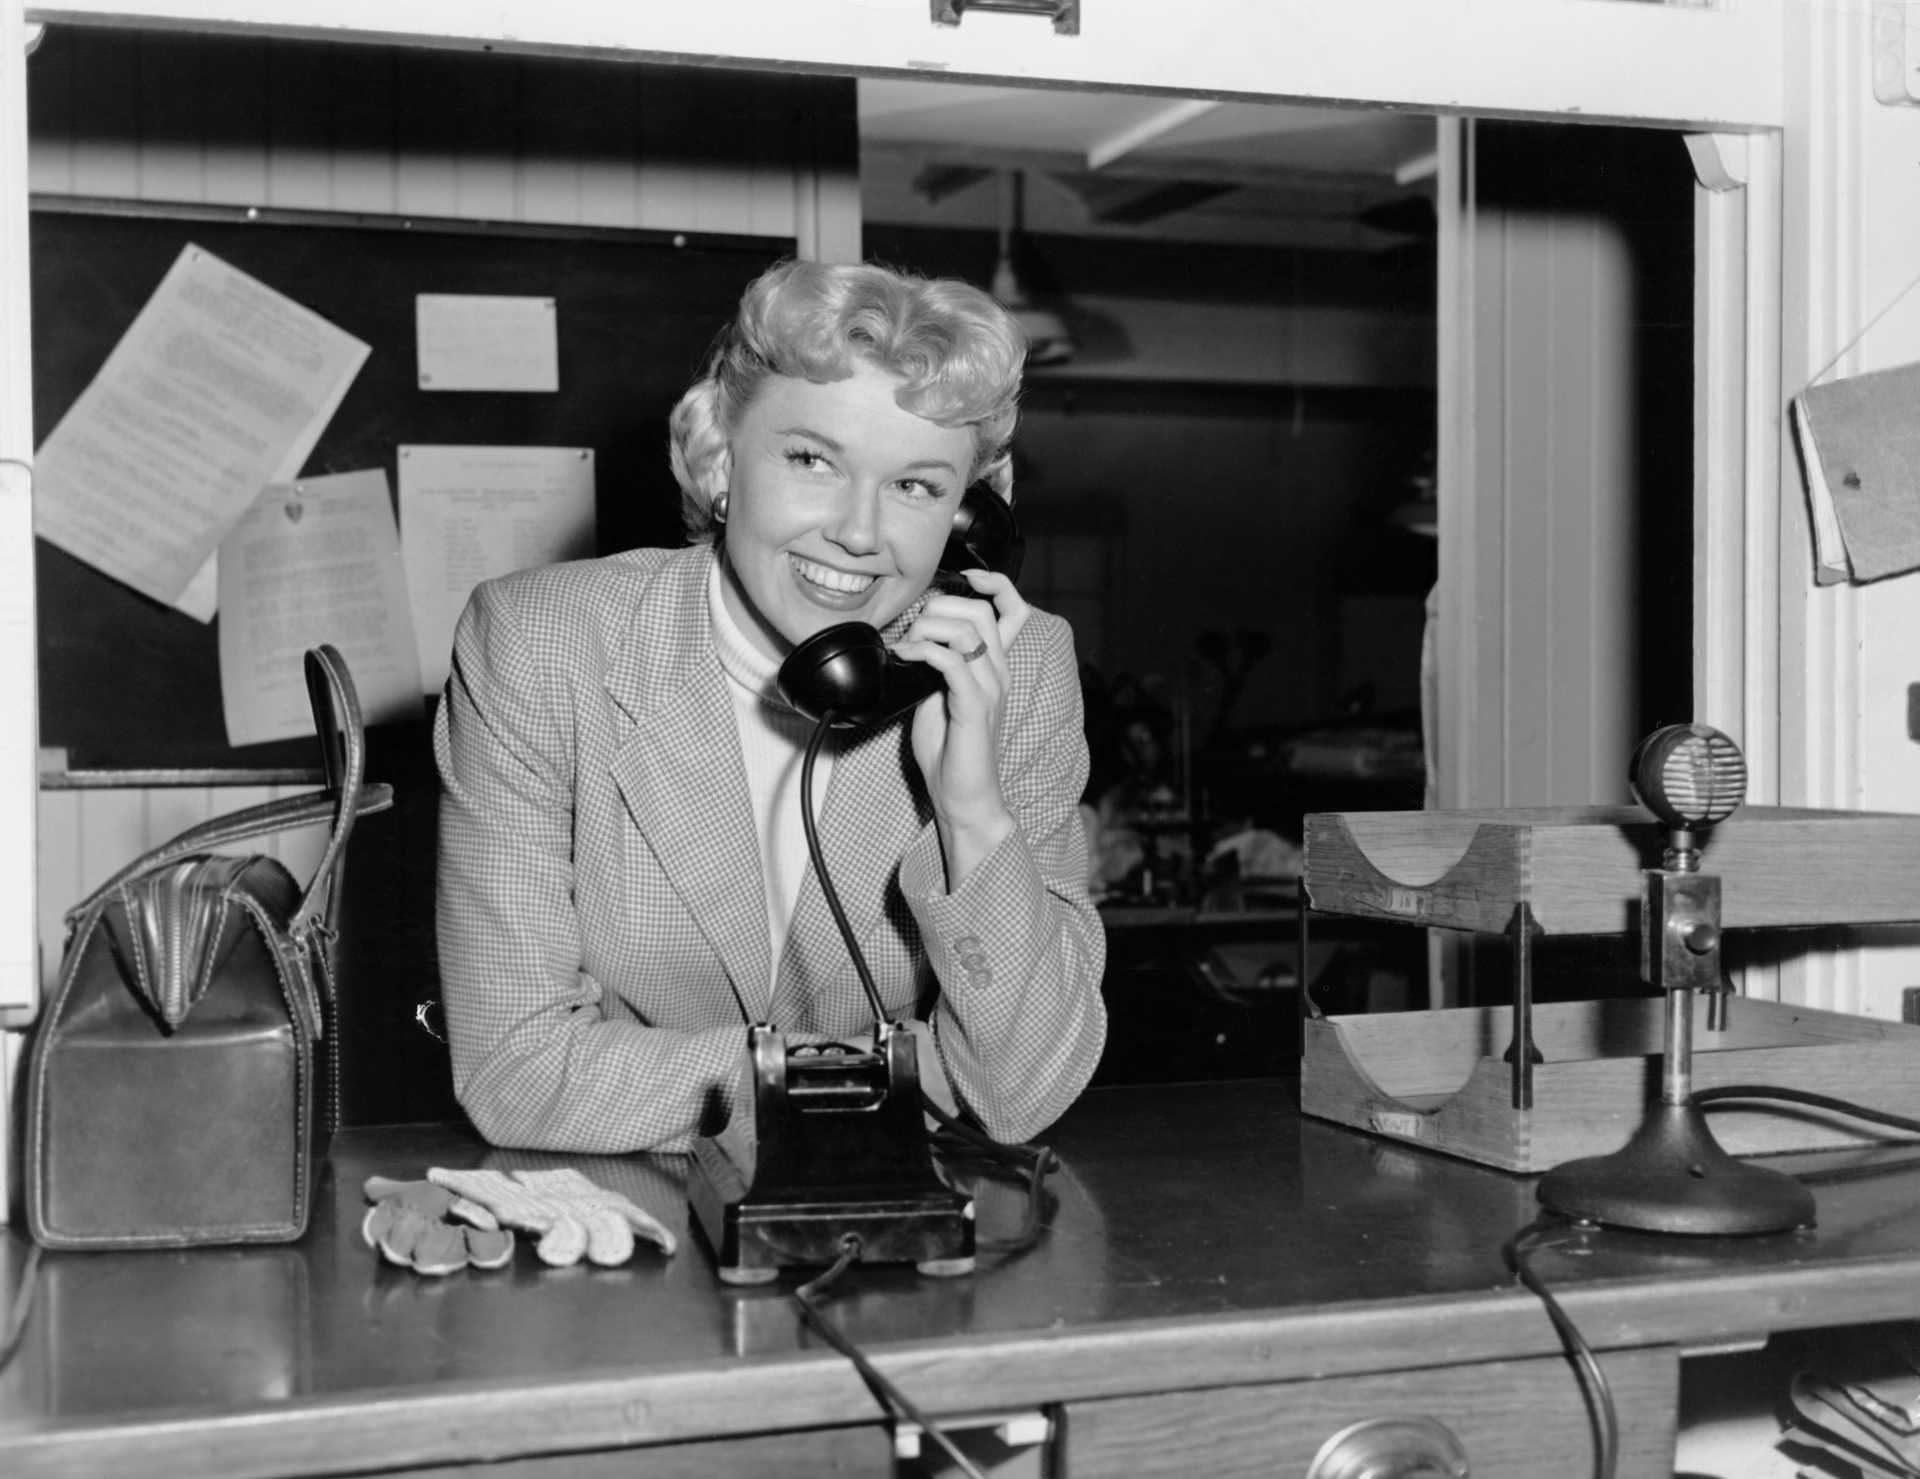 Doris Day | Pictorial Parade/Archive Photos/Getty Images